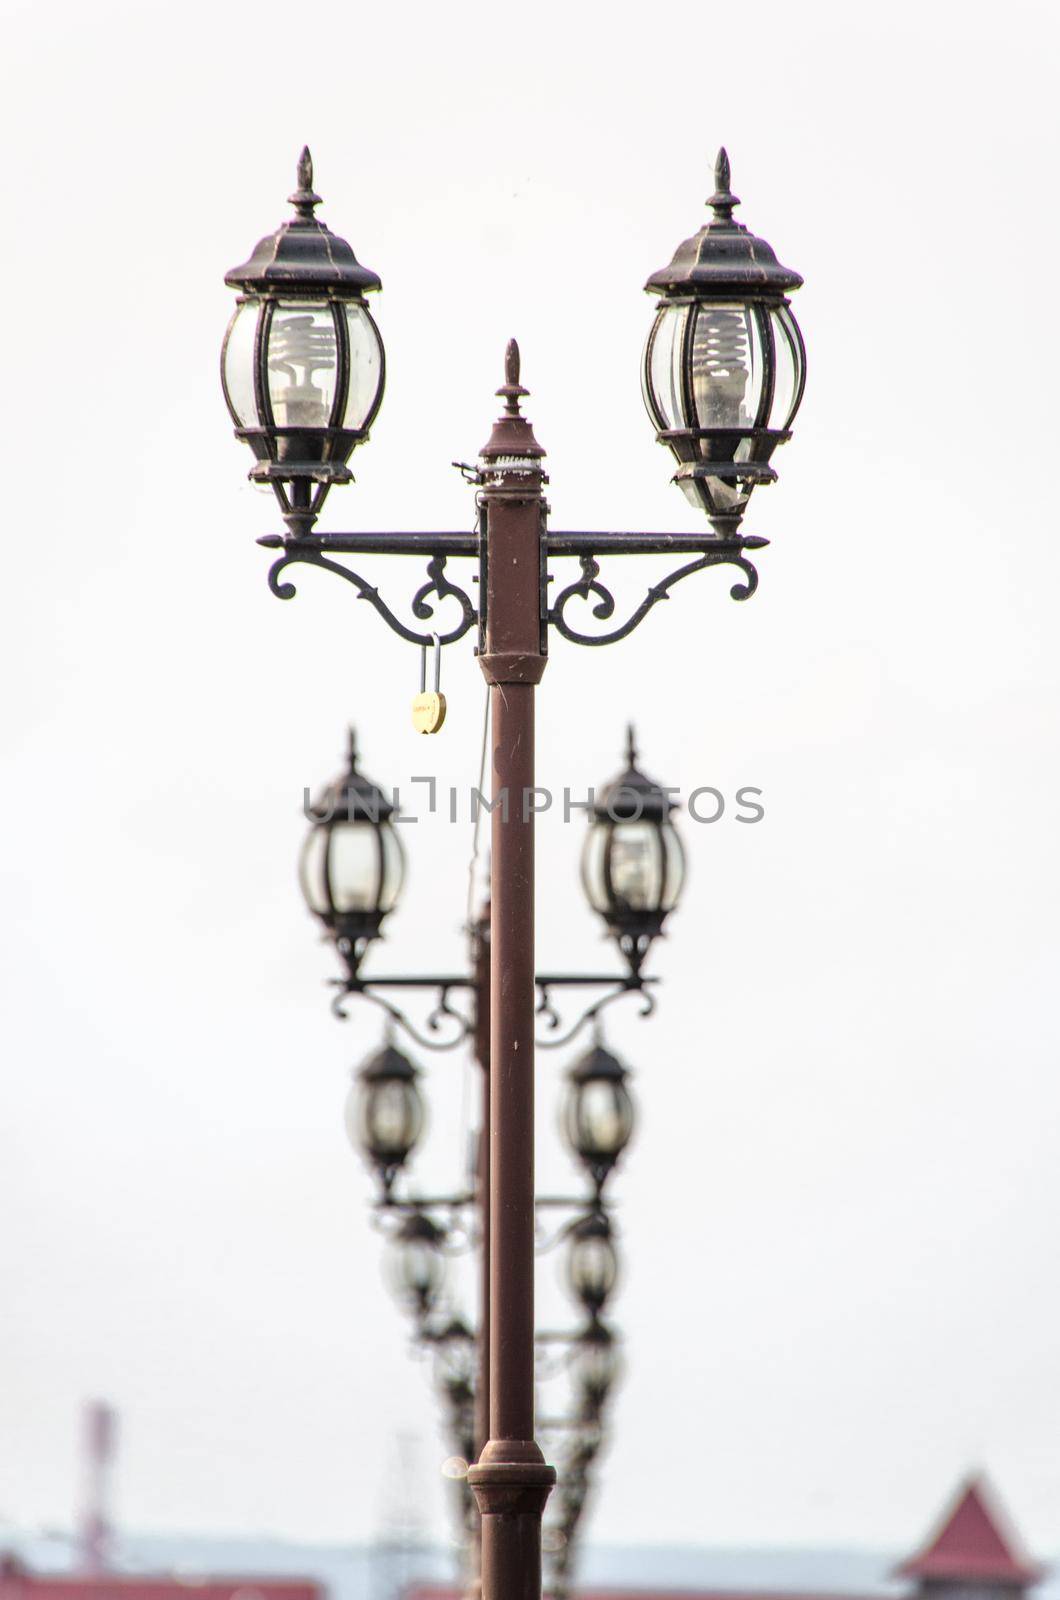 Streetlights on white a background by Proff